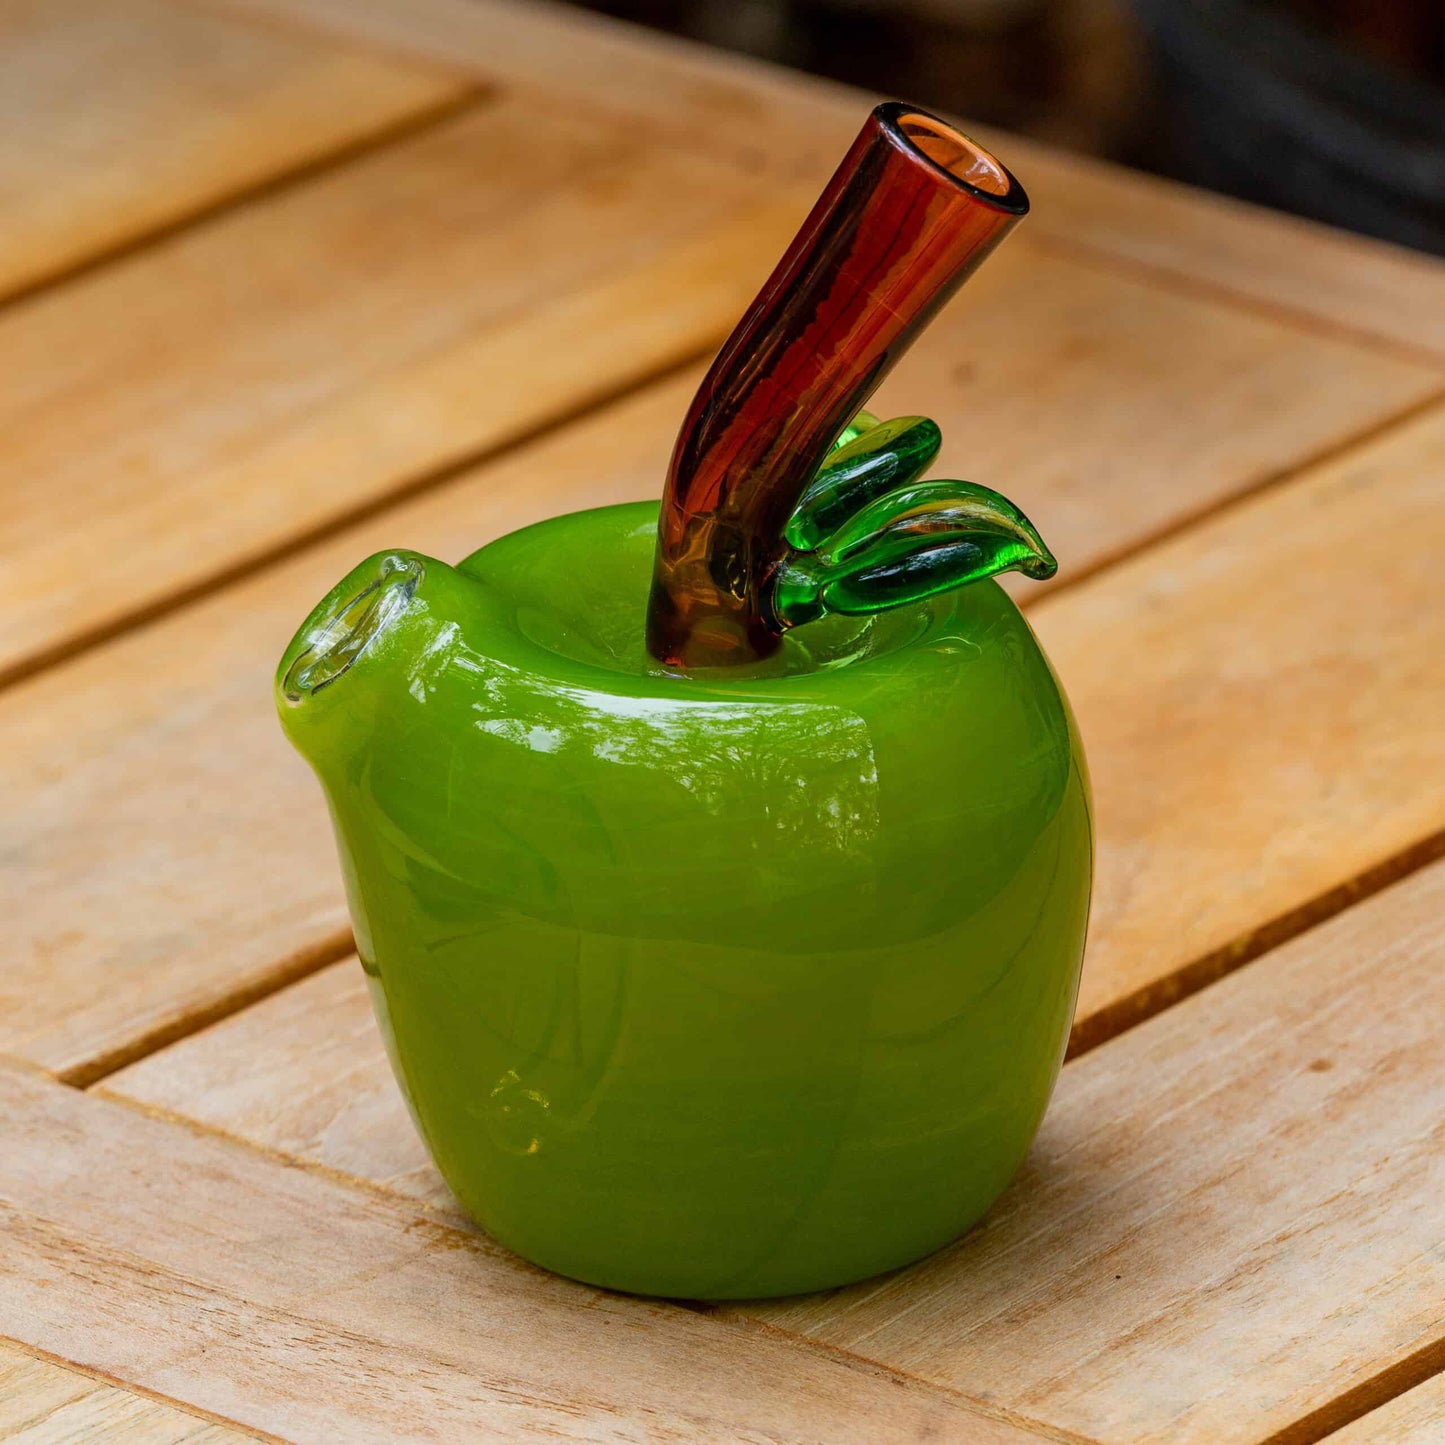 innovative design of the Green Apple Rig by Pouch Glass